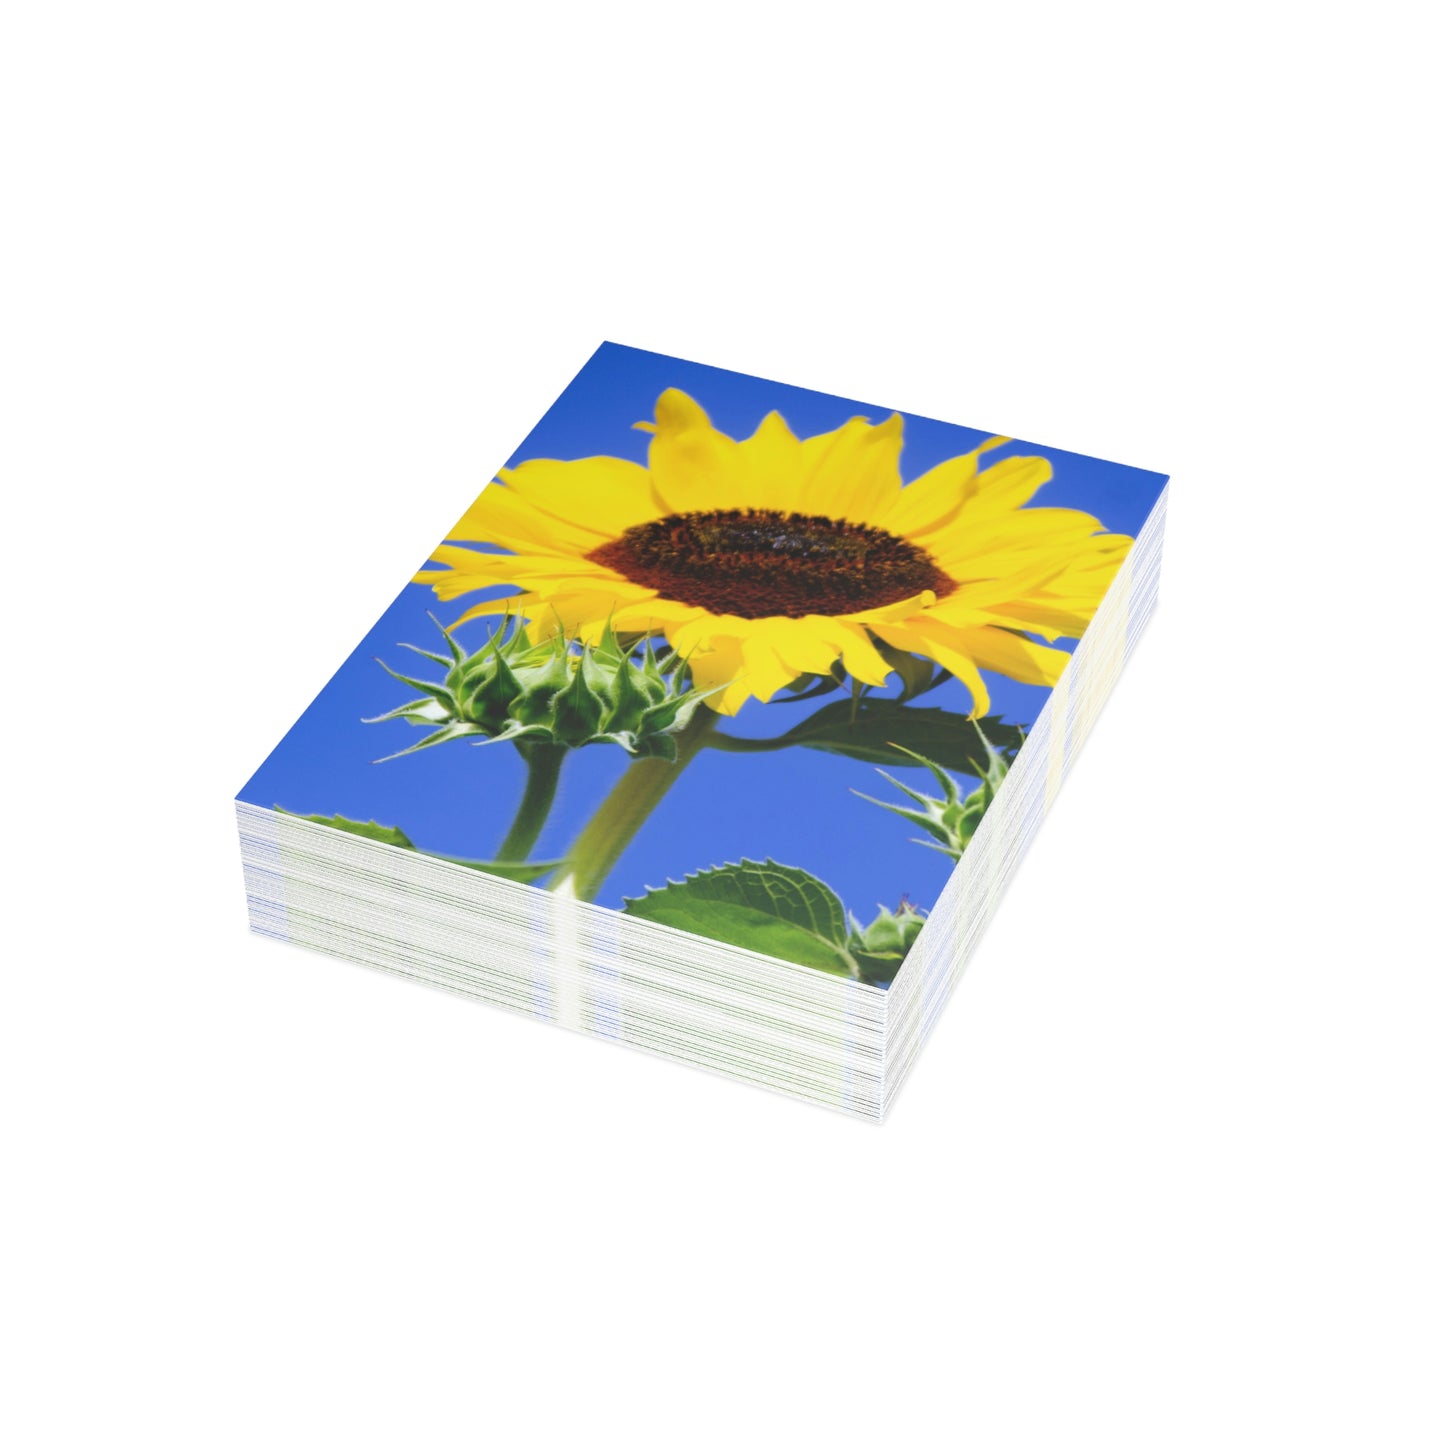 Flowers 02 Greeting Cards (1, 10, 30, and 50pcs)